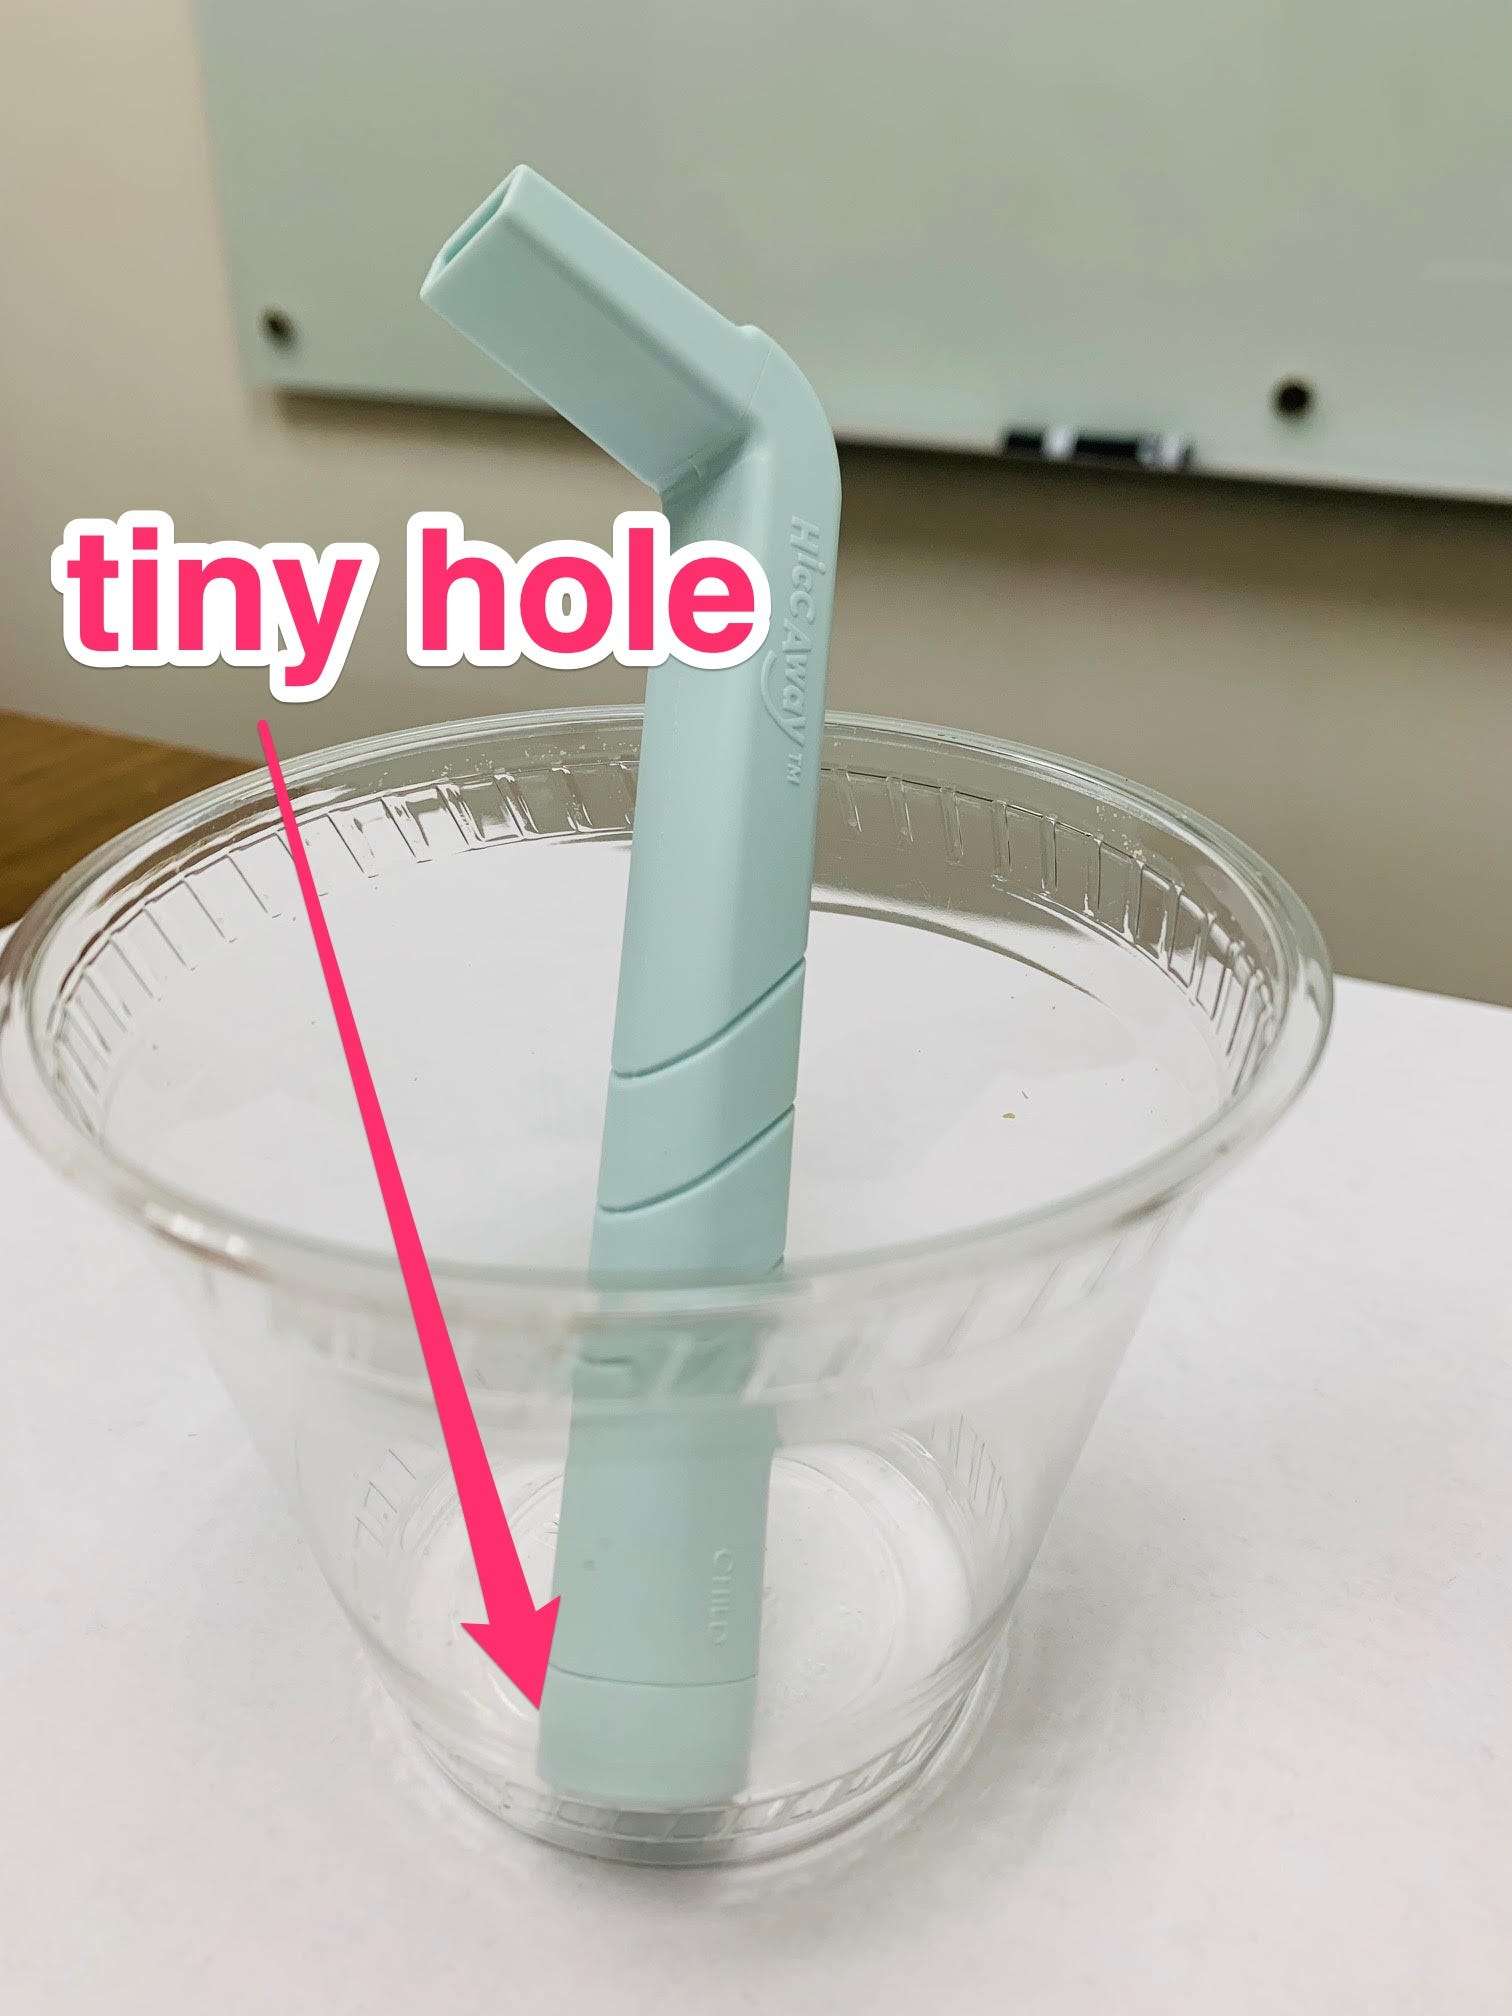 HiccAway: doctors invent $14 straw guaranteed to stop hiccups